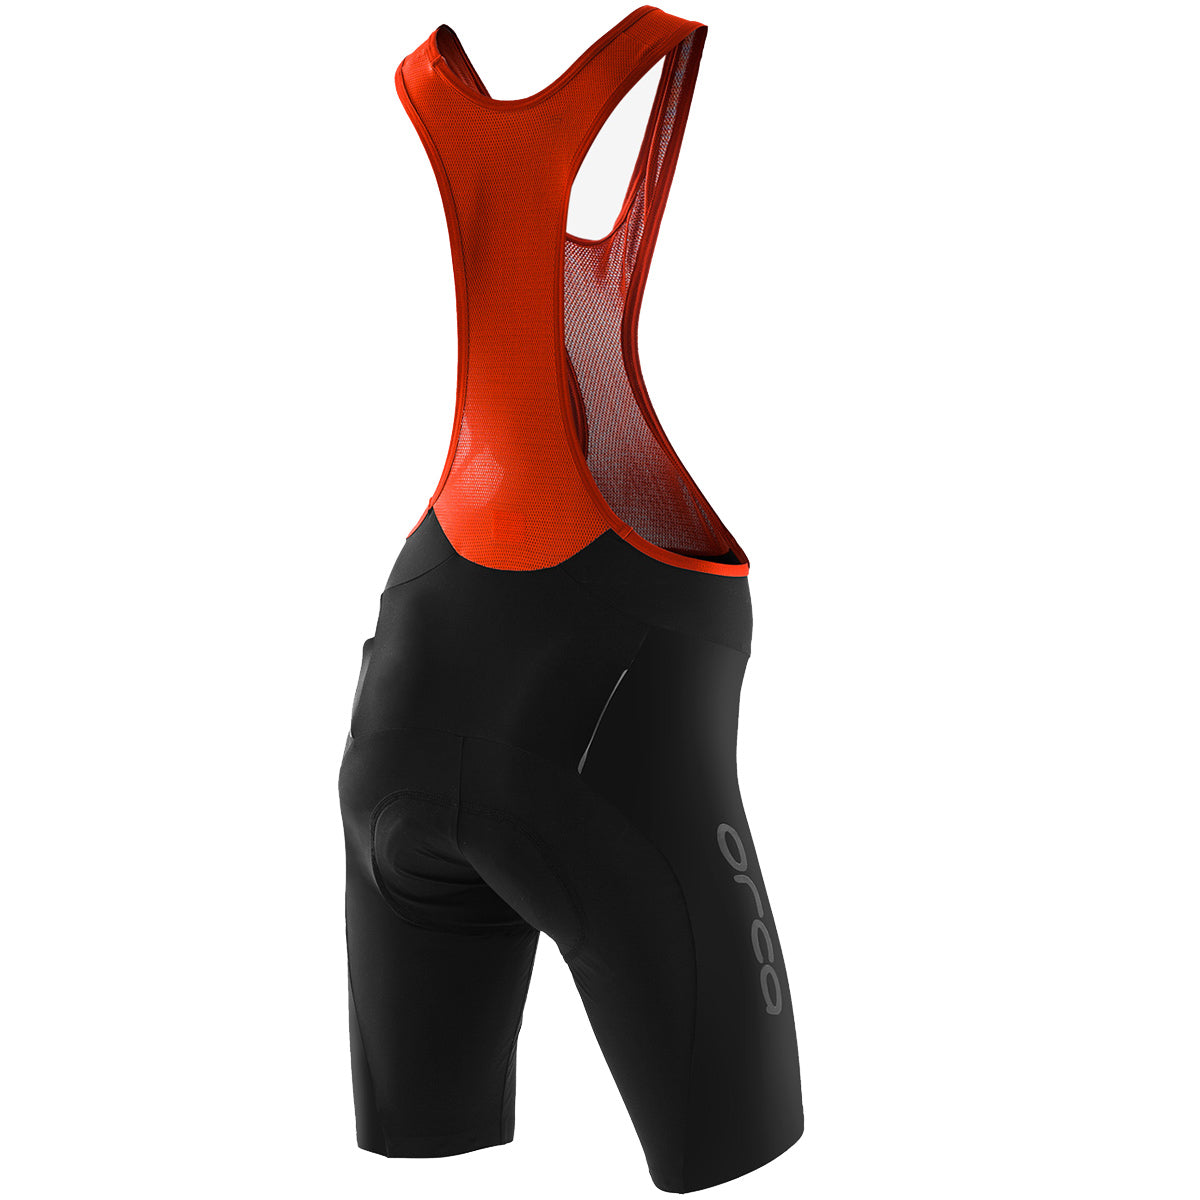 Culotte mujer Orca - Negro rojo All4cycling